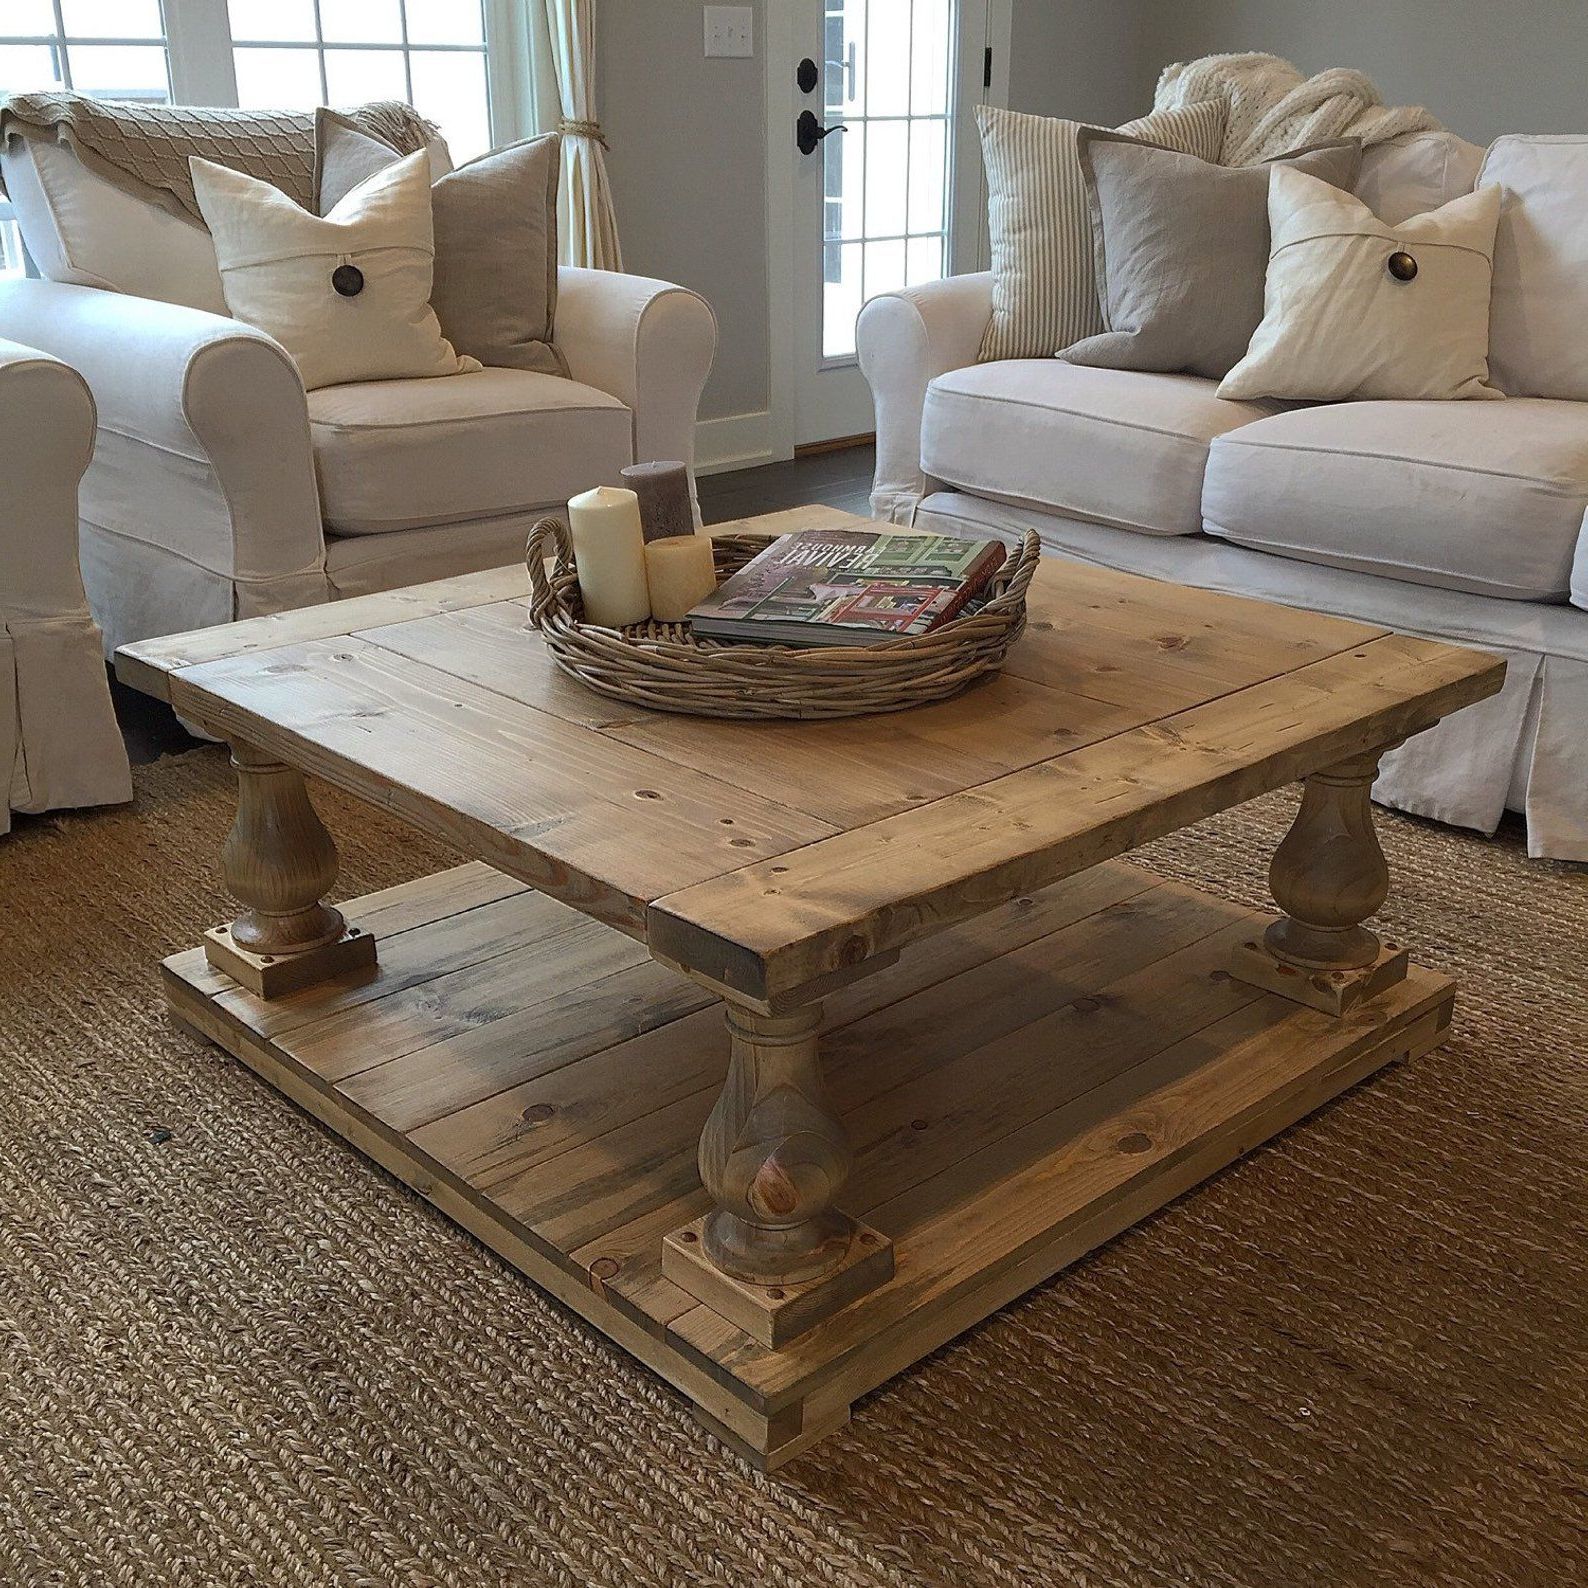 5 Reasons To Invest In A Rustic Farmhouse Coffee Table – Coffee Table Decor Pertaining To Living Room Farmhouse Coffee Tables (View 12 of 20)